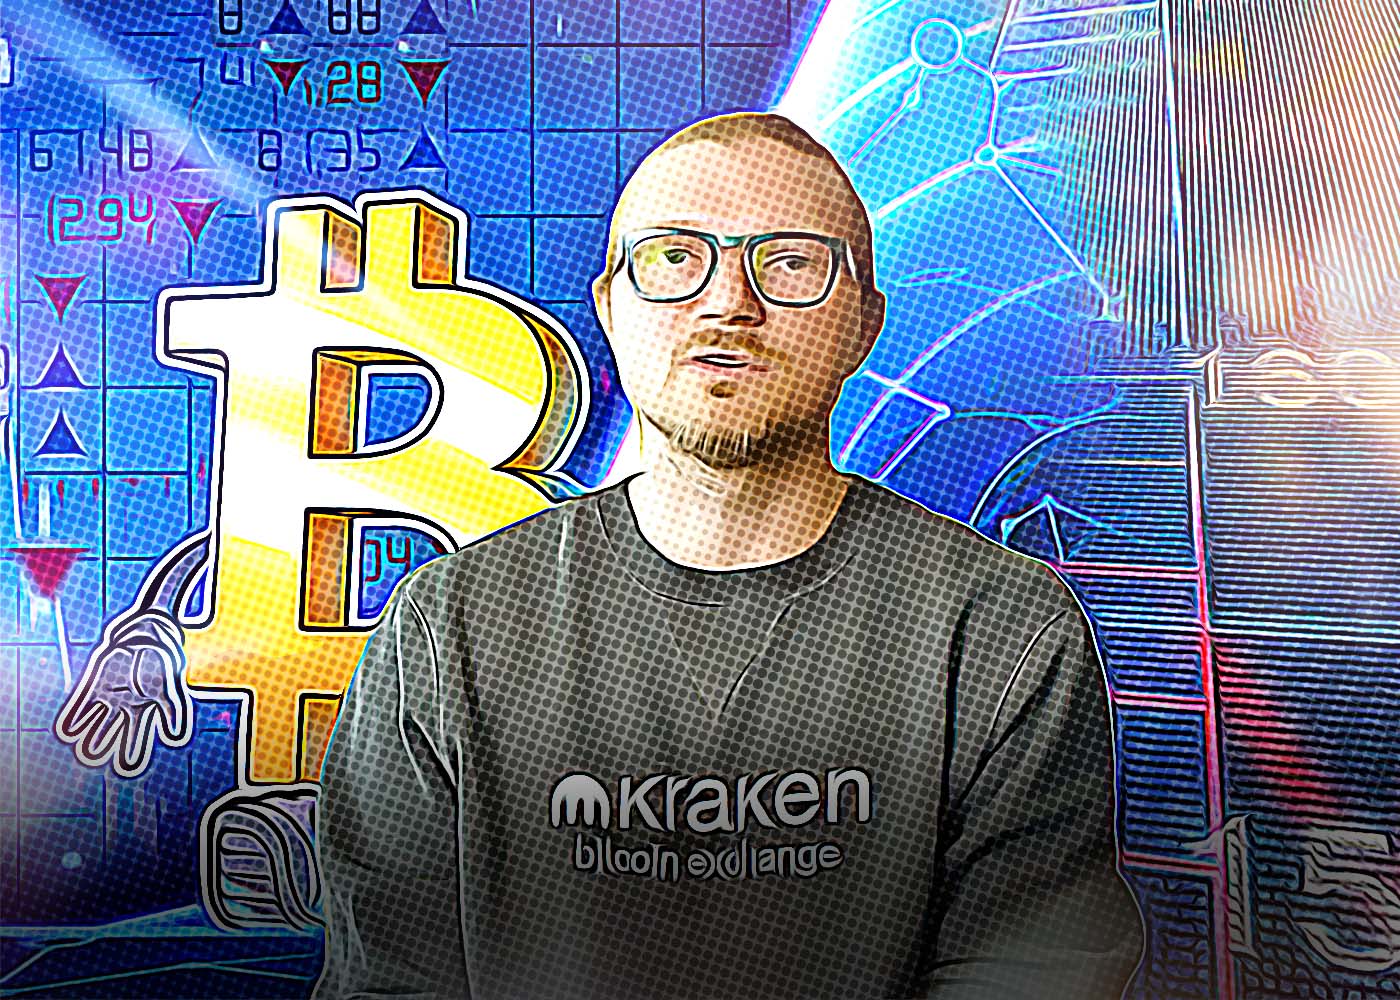 Regulators to Blame for the Crisis in Cryptocurrencies, According to Kraken CEO